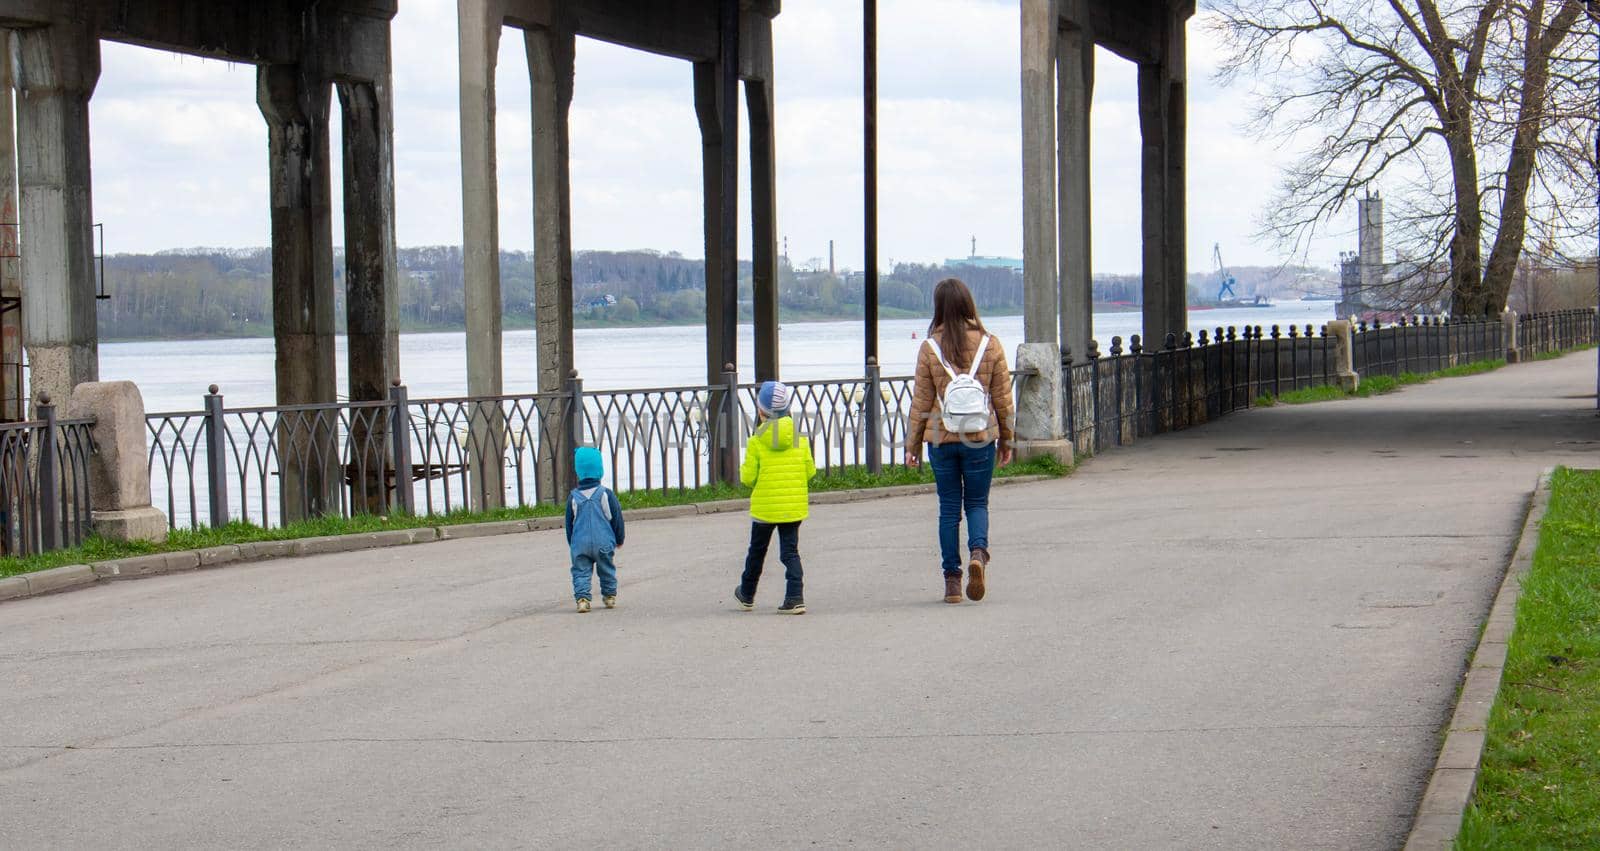 A mother and two small children walk along the embankment on a clear spring day.